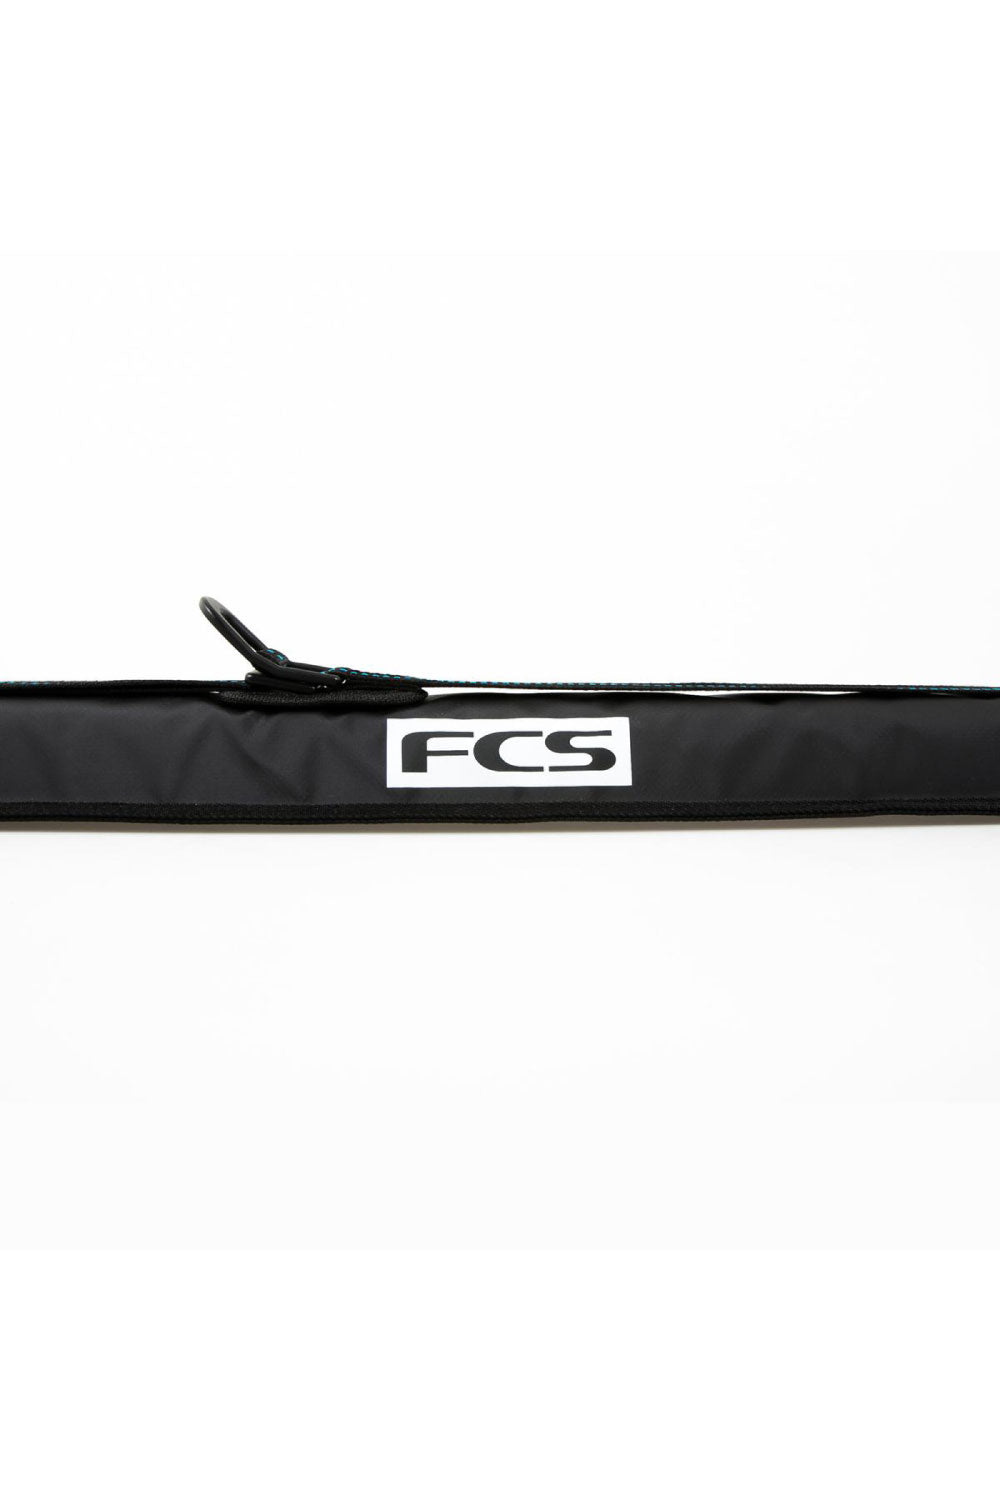 FCS D-Ring SUP (Stand Up Paddle Board) Single Soft Rack